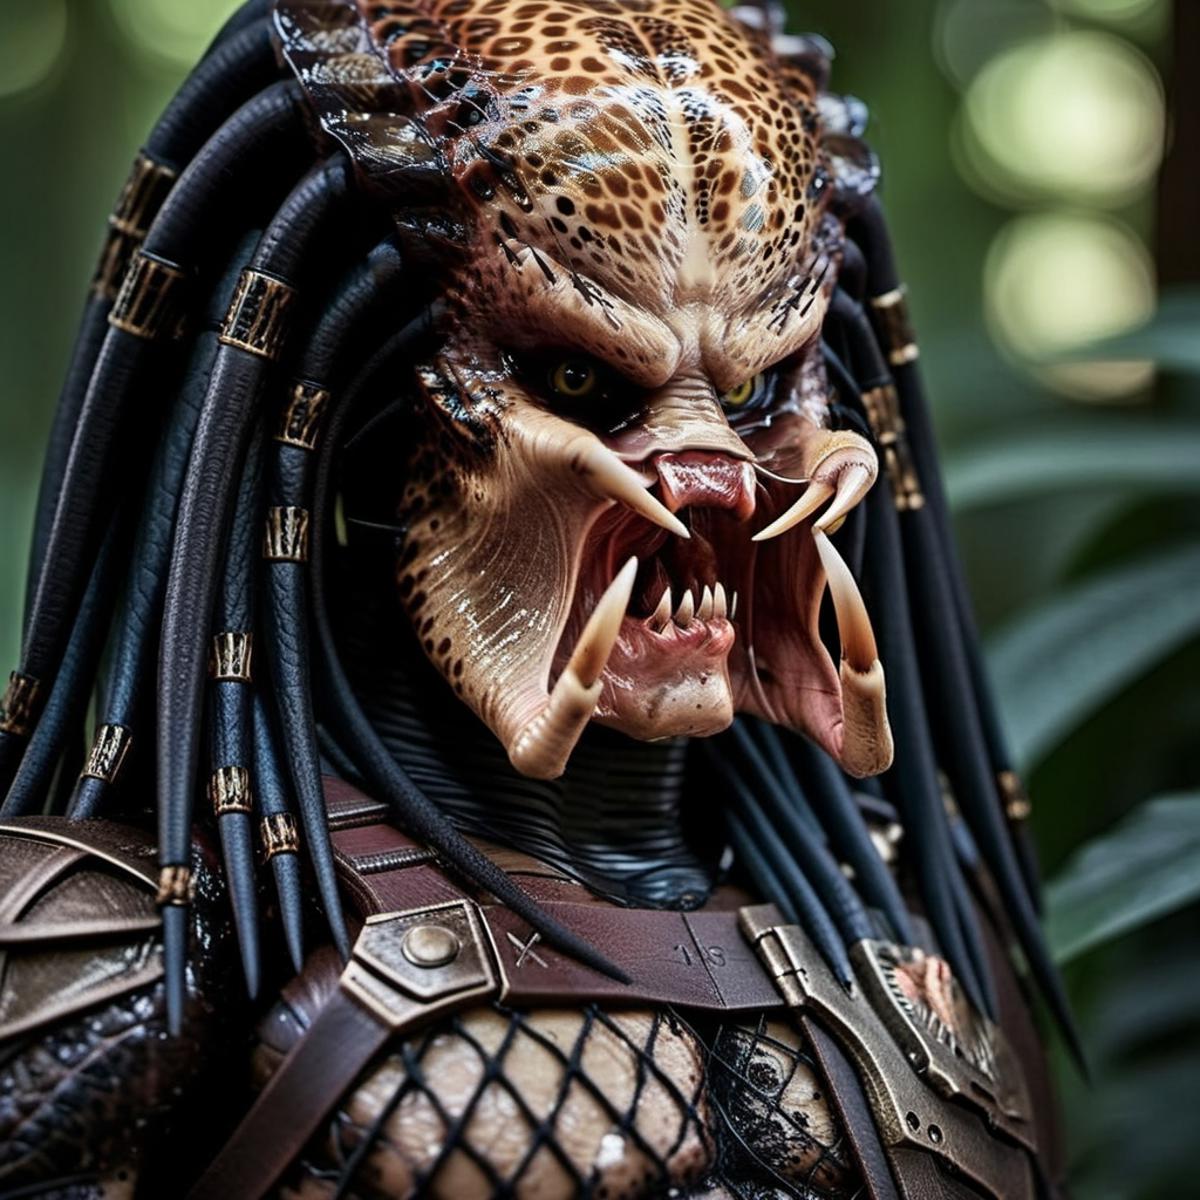 The Predator's face is shown in close-up, displaying its menacing teeth and mandibles.